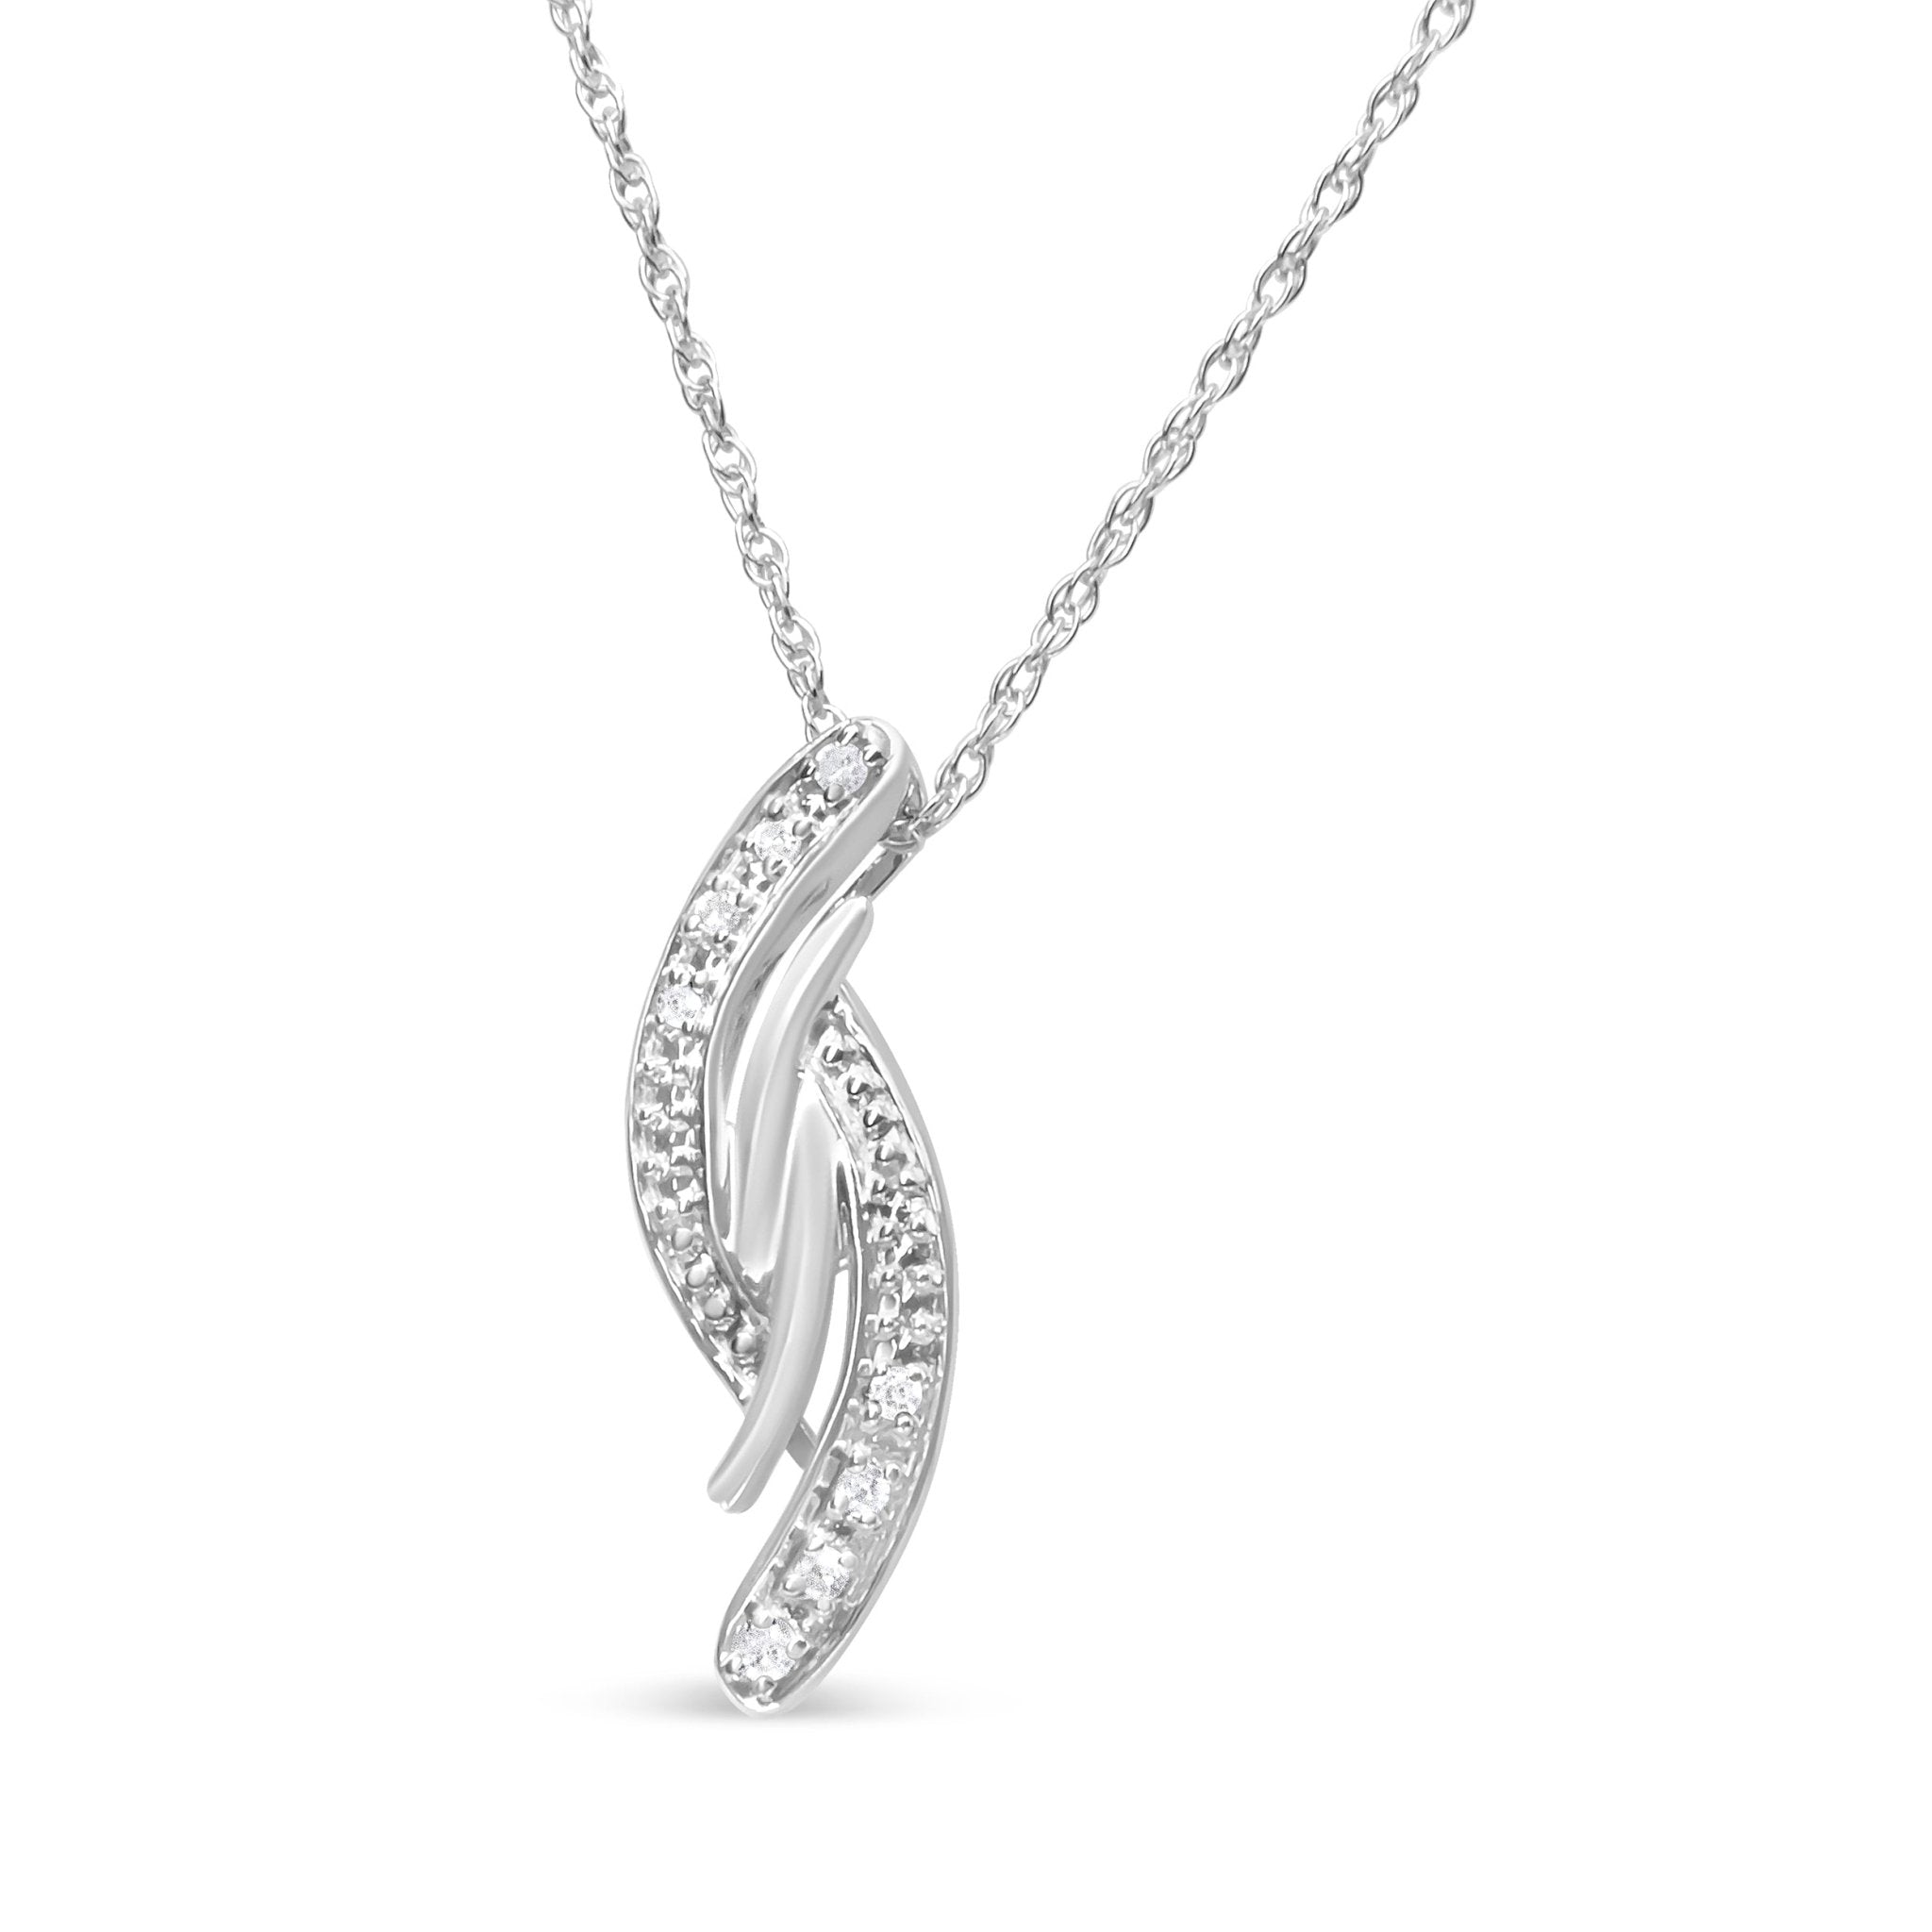 .925 Sterling Silver Diamond Accent Bypass Curve 18" Pendant Necklace (I-J Color, I3 Clarity) - Tuesday Morning-Pendant Necklace